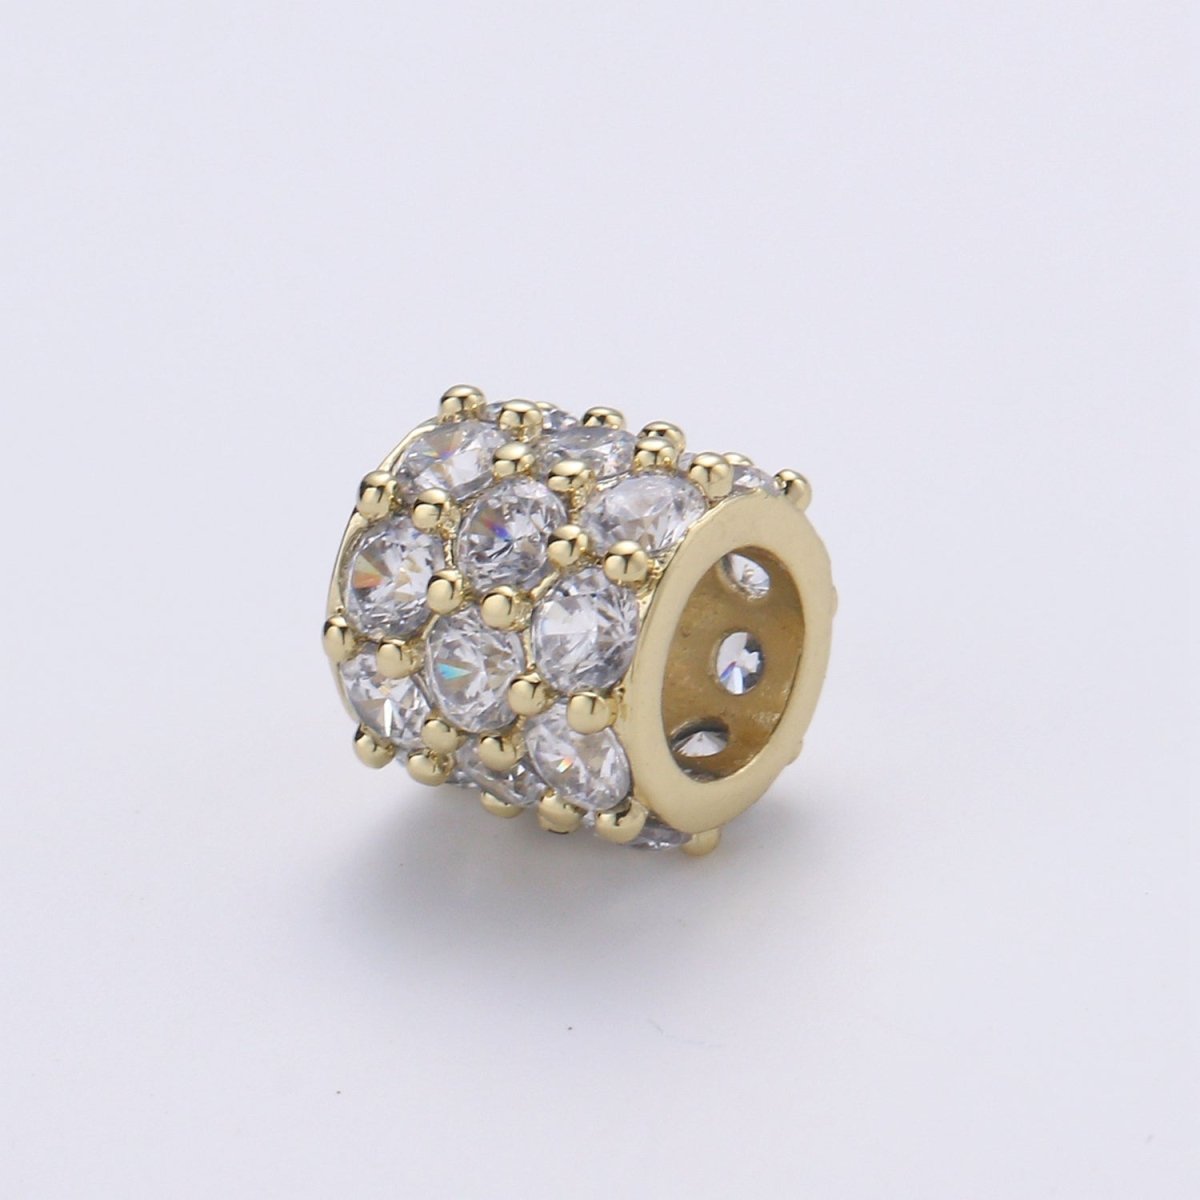 Dainty Golden Circle Roll Beads CZ Gold Filled Geometric Round Roll Jewelry Making Beads B-332 - DLUXCA